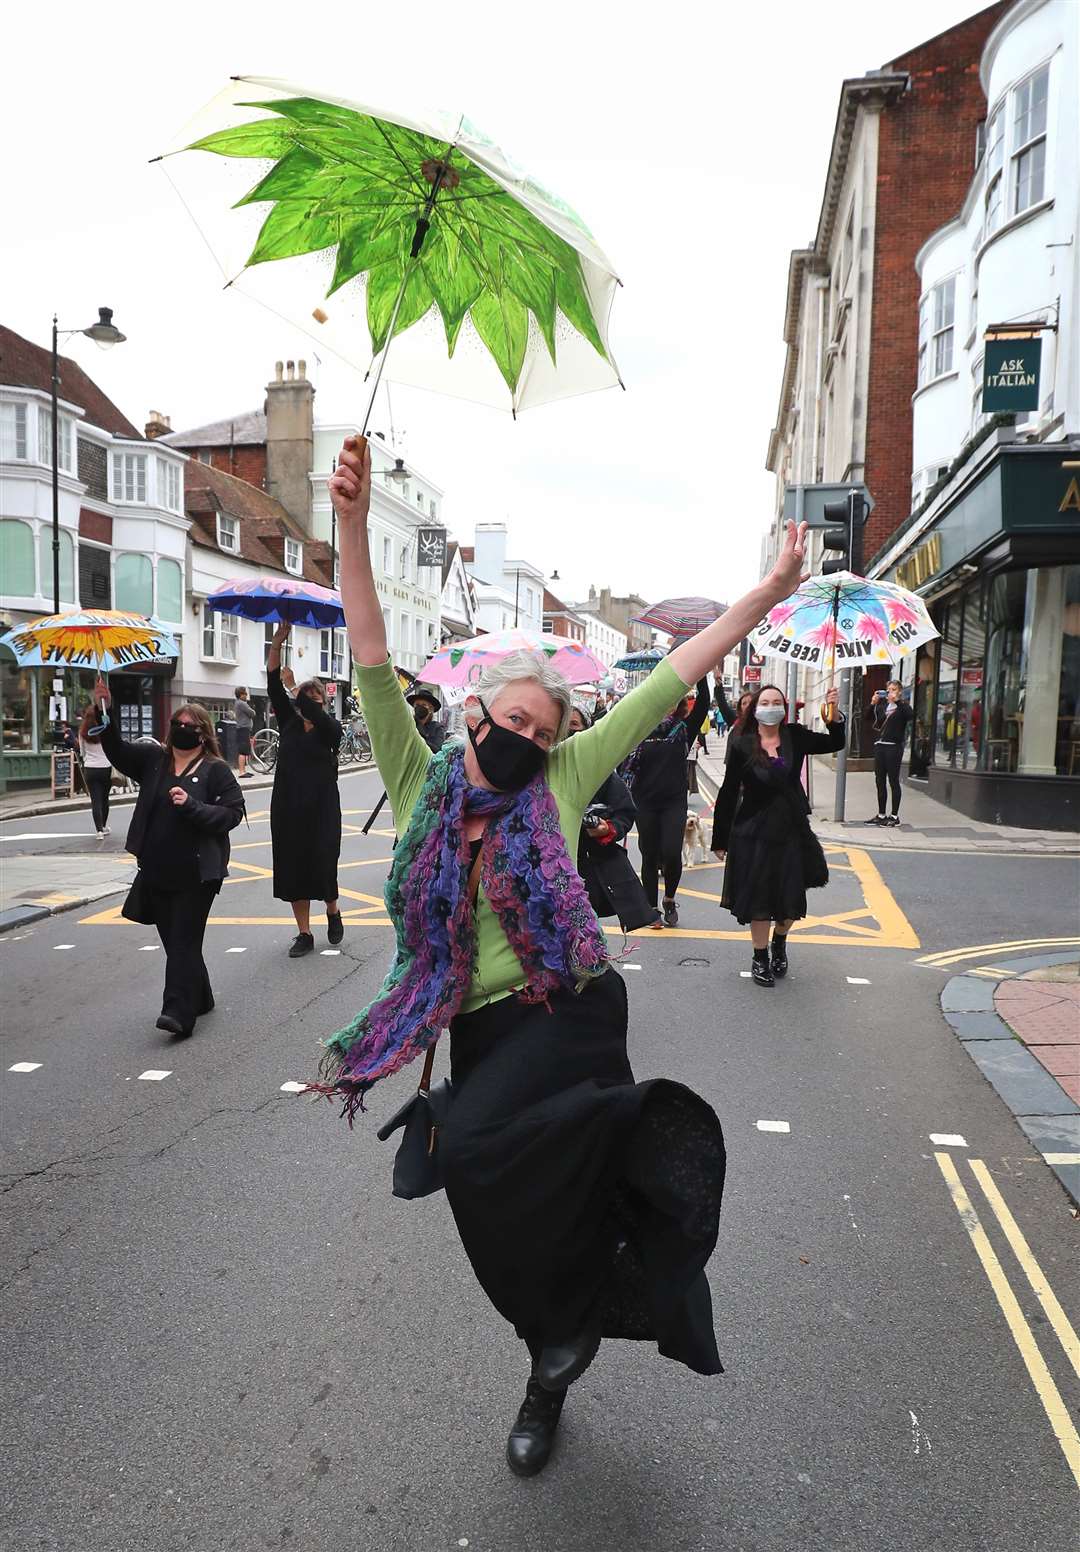 Some of the activists danced along the street (Gareth Fuller/PA)